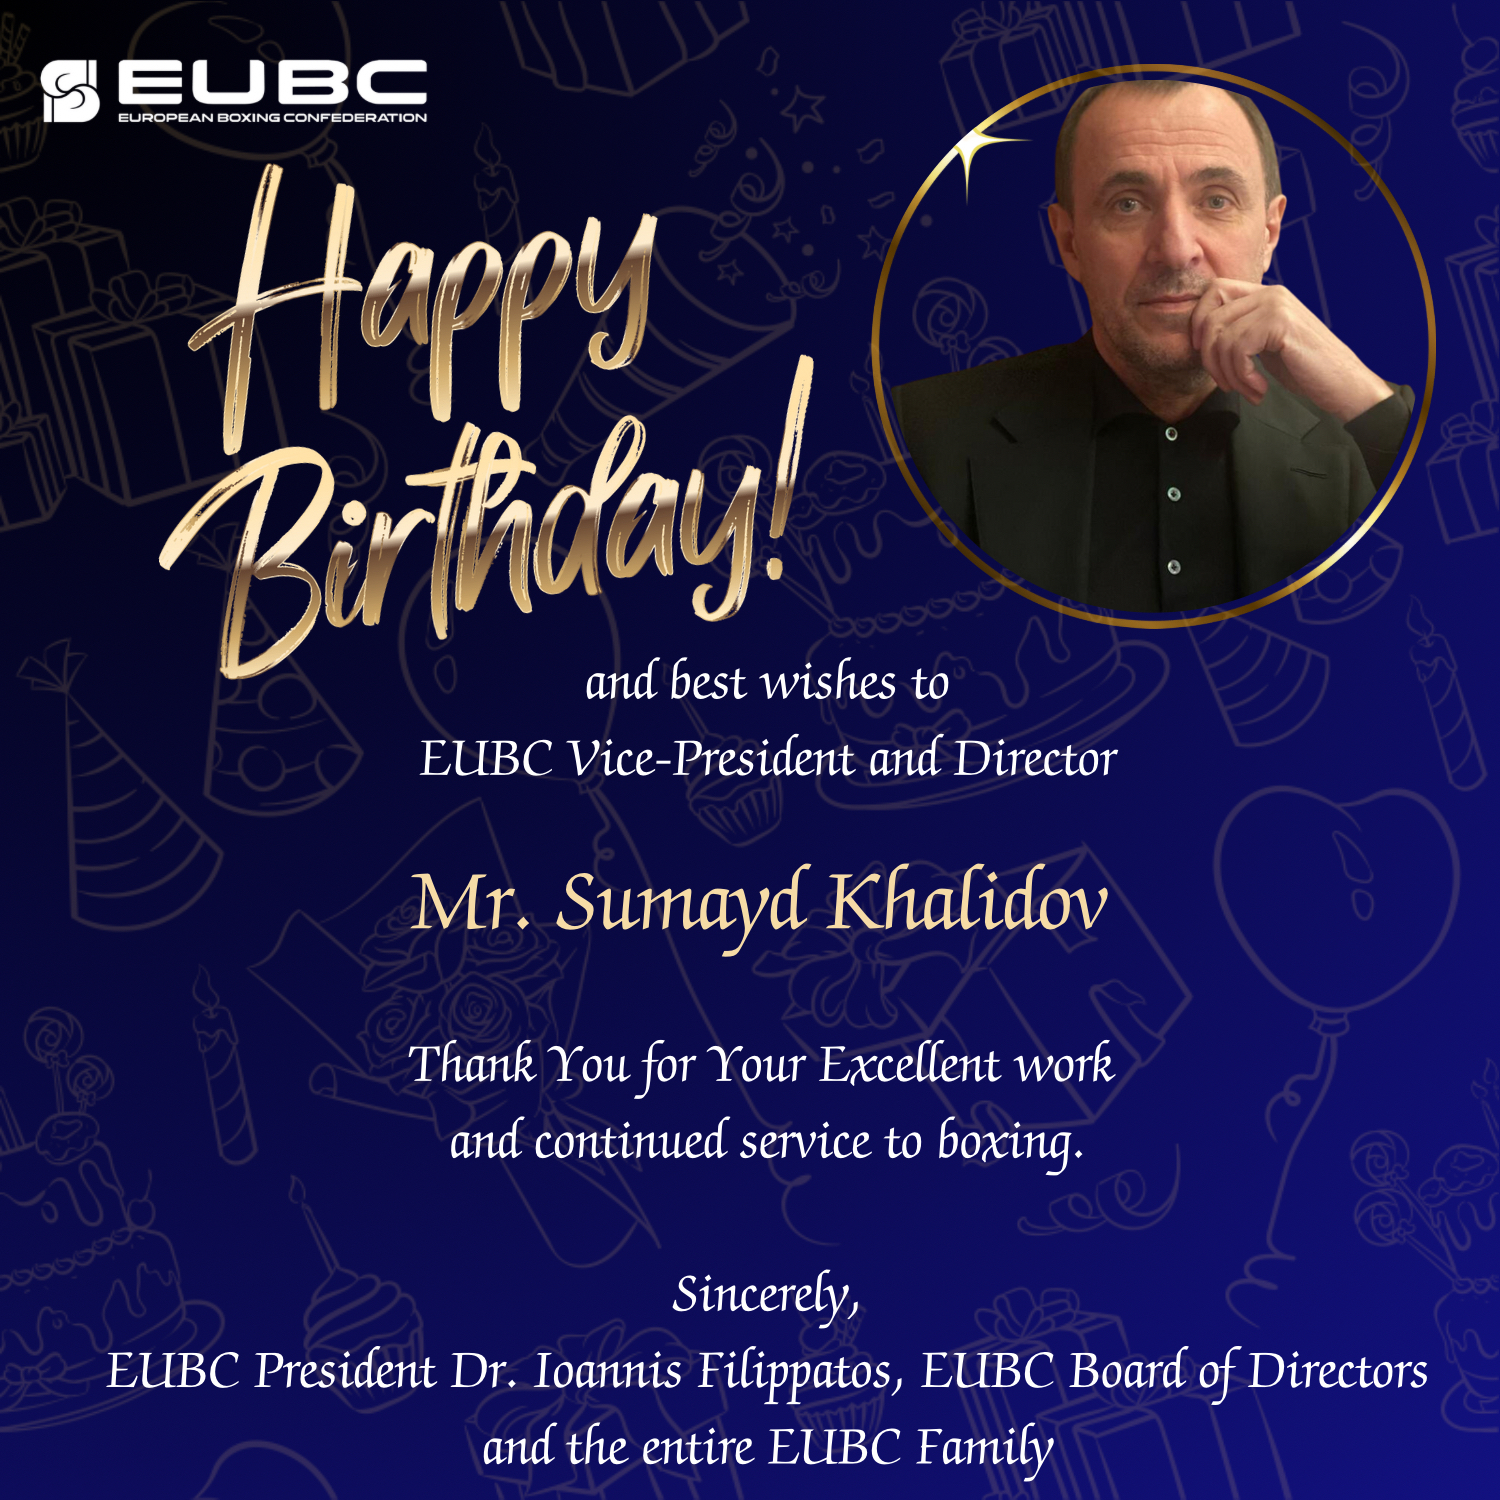 Happy Birthday and best wishes toEUBC Vice-President and Director Mr. Sumayd KHALIDOV!